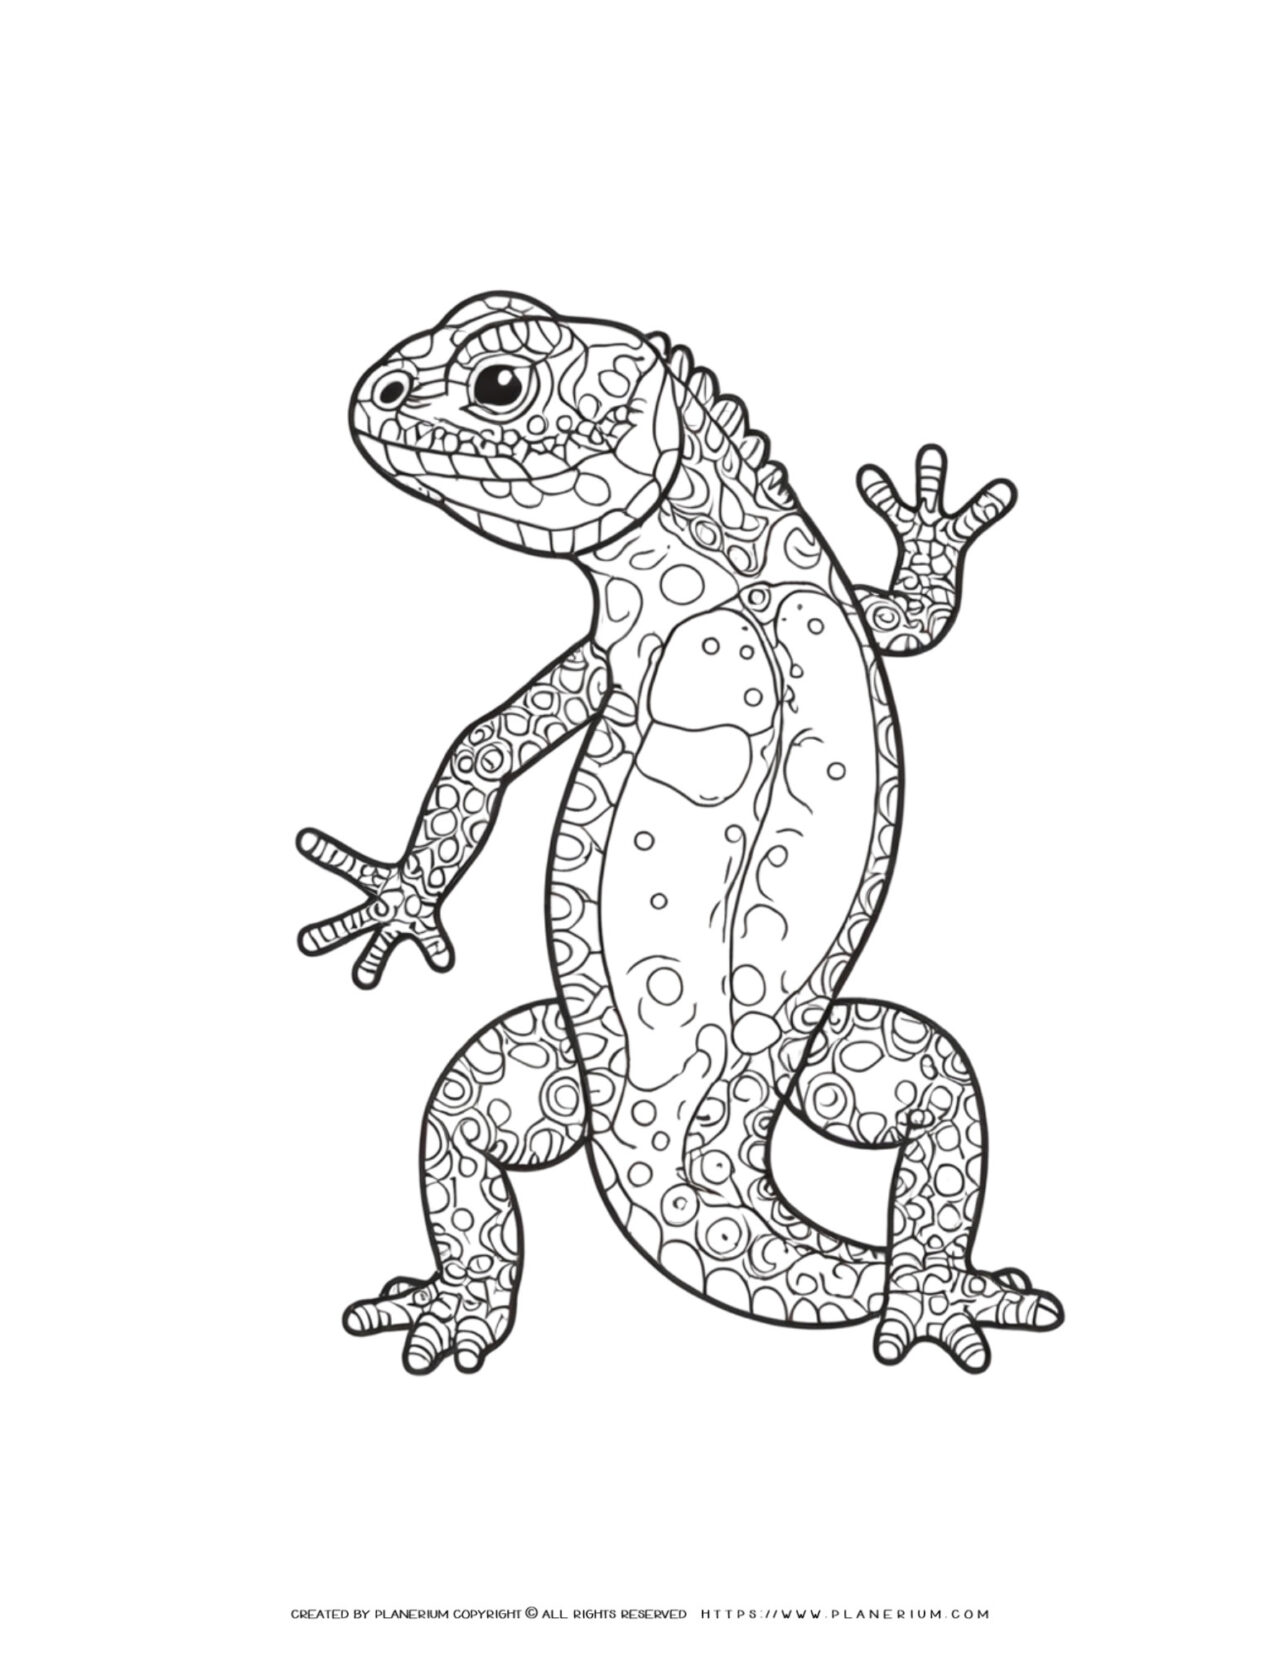 Detailed-Lizard-Outline-Coloring-Page